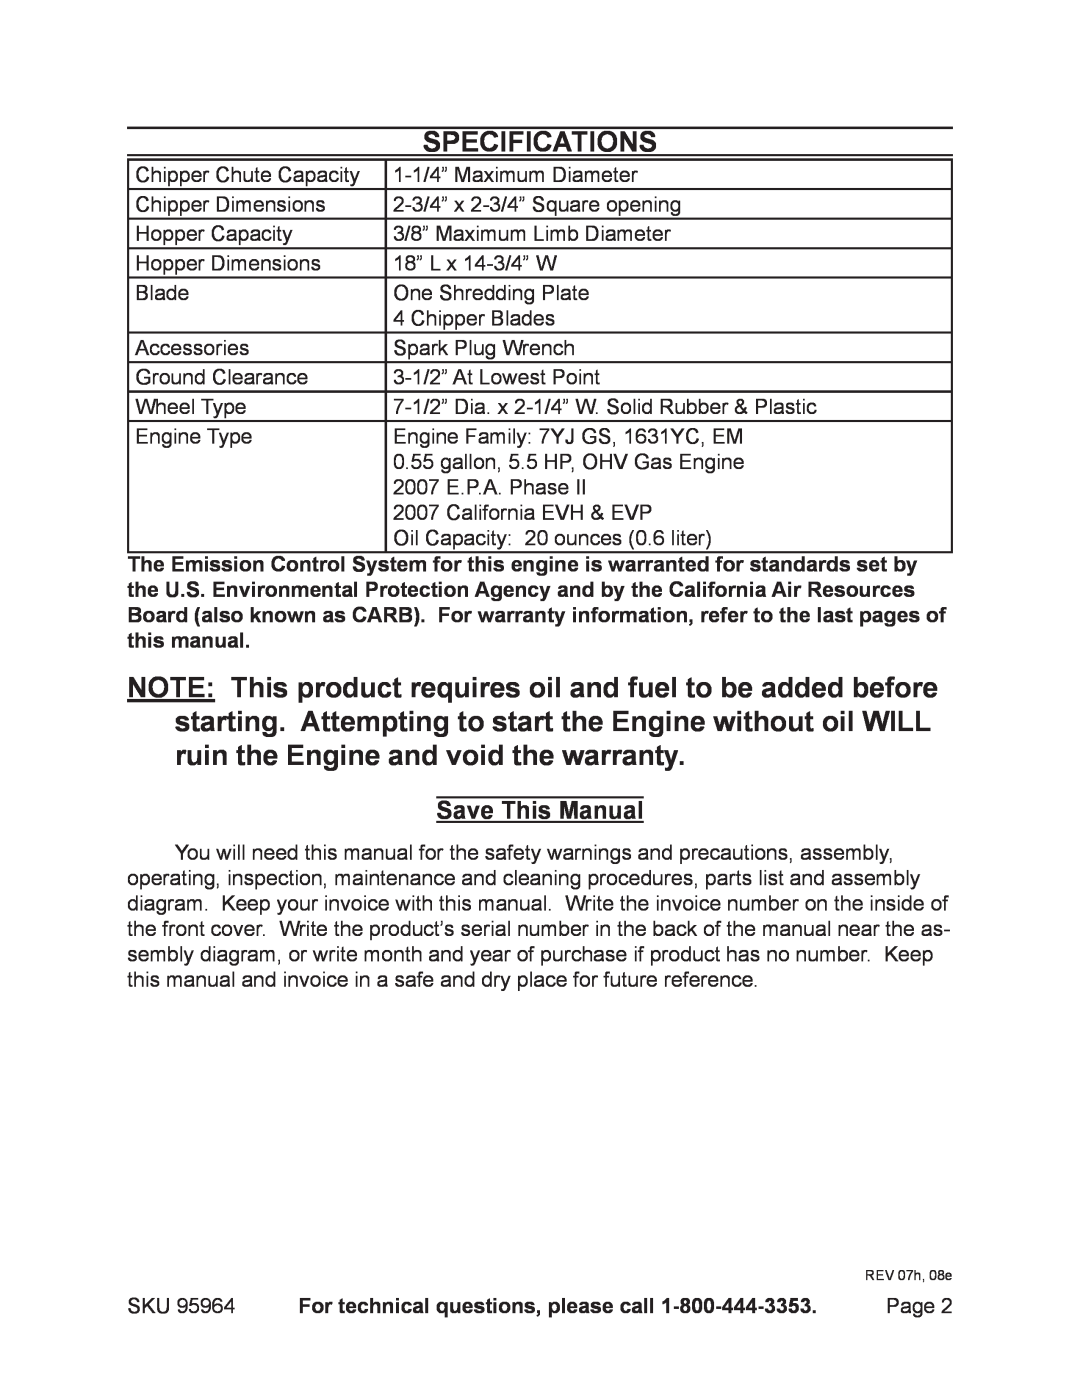 Harbor Freight Tools 95964 operating instructions Specifications, Save This Manual, For technical questions, please call 